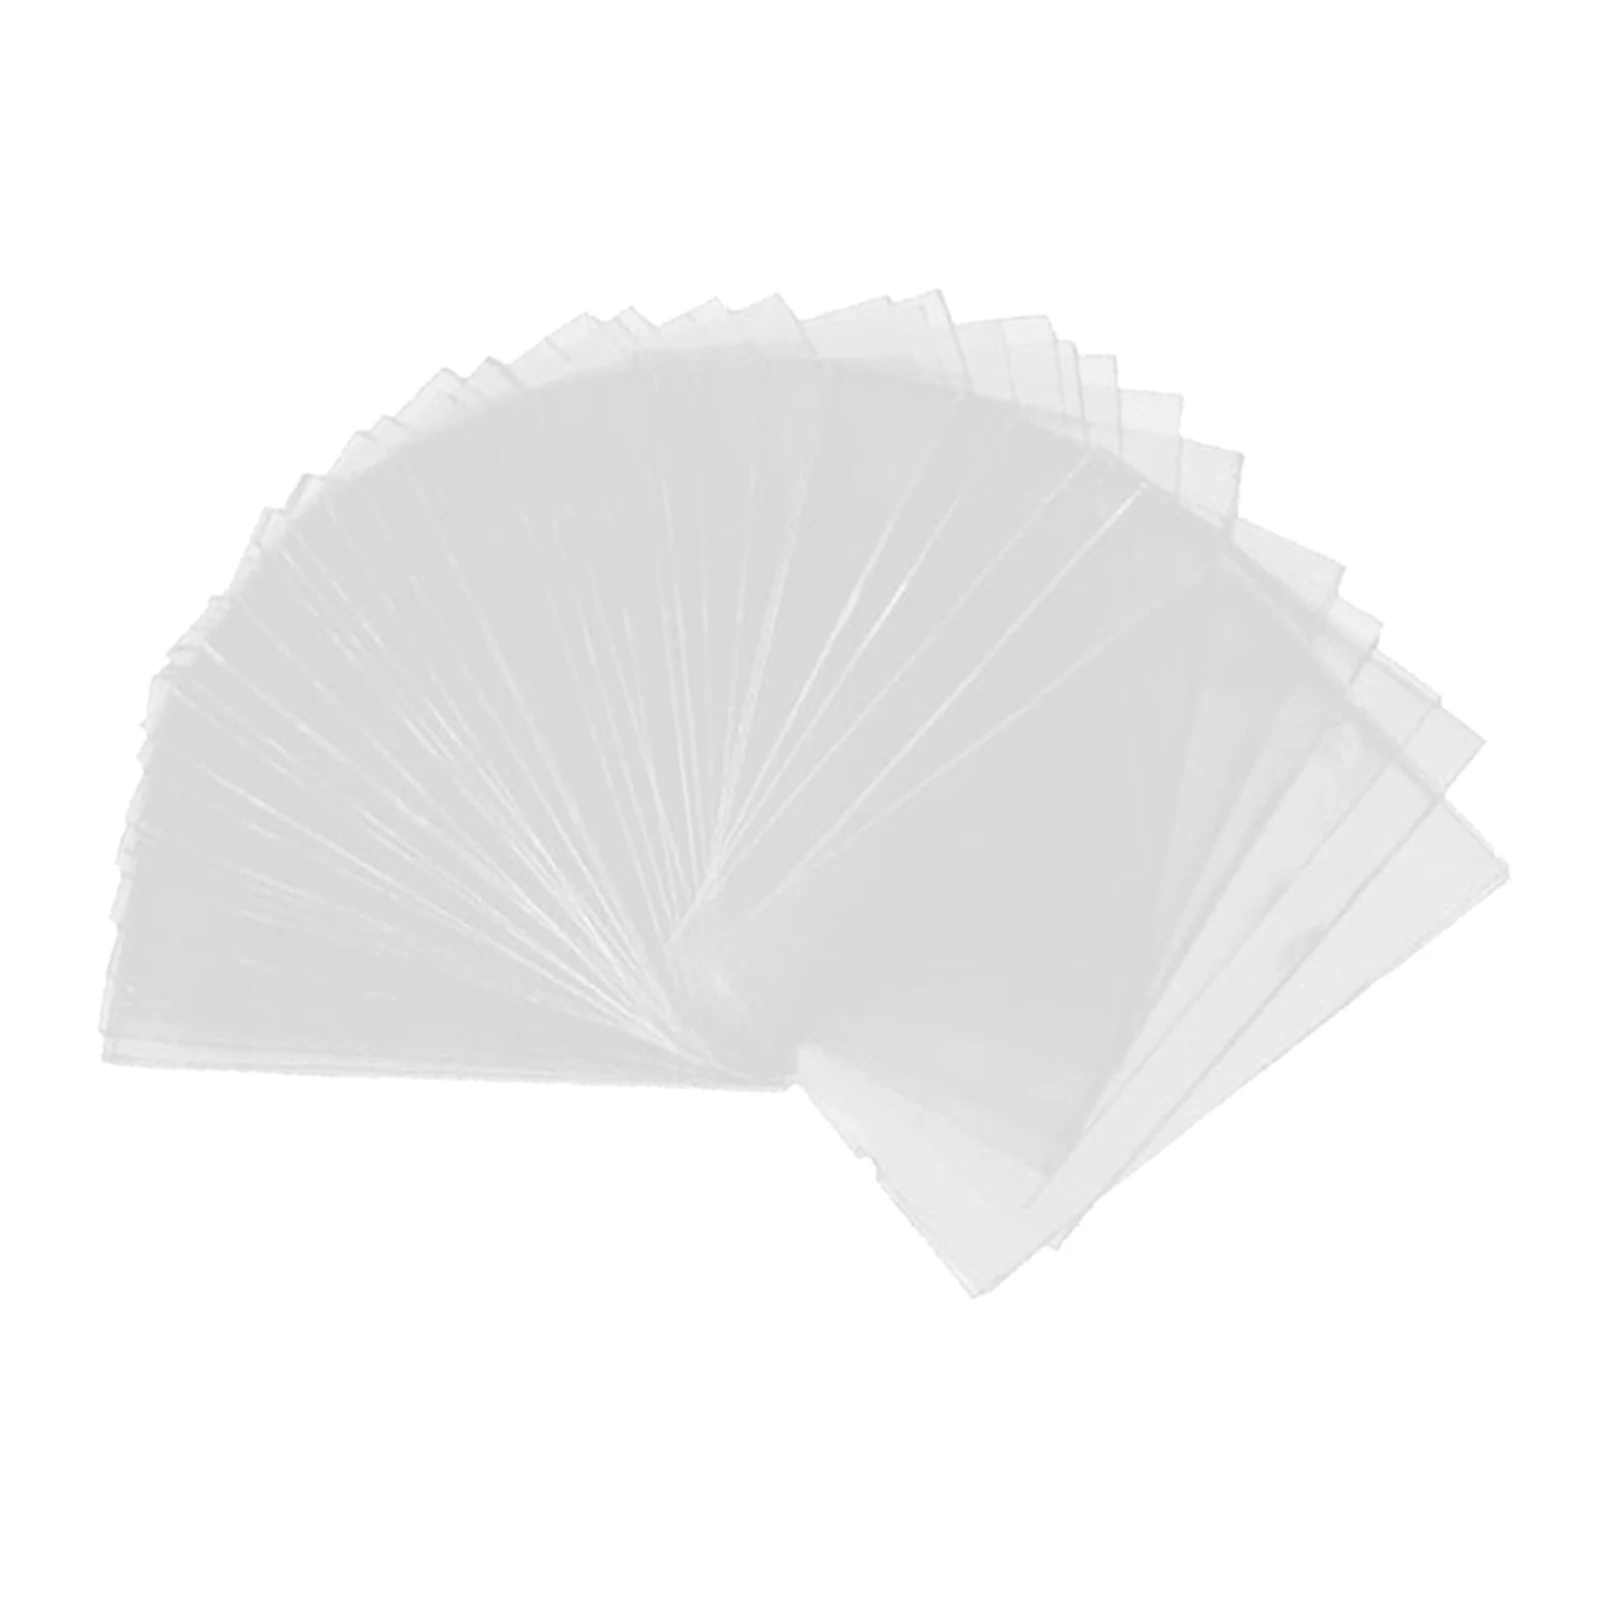 Clear 100pcs Tarot Card Sleeves Board Game Poker Cards Protector, 7.5X10.5cm